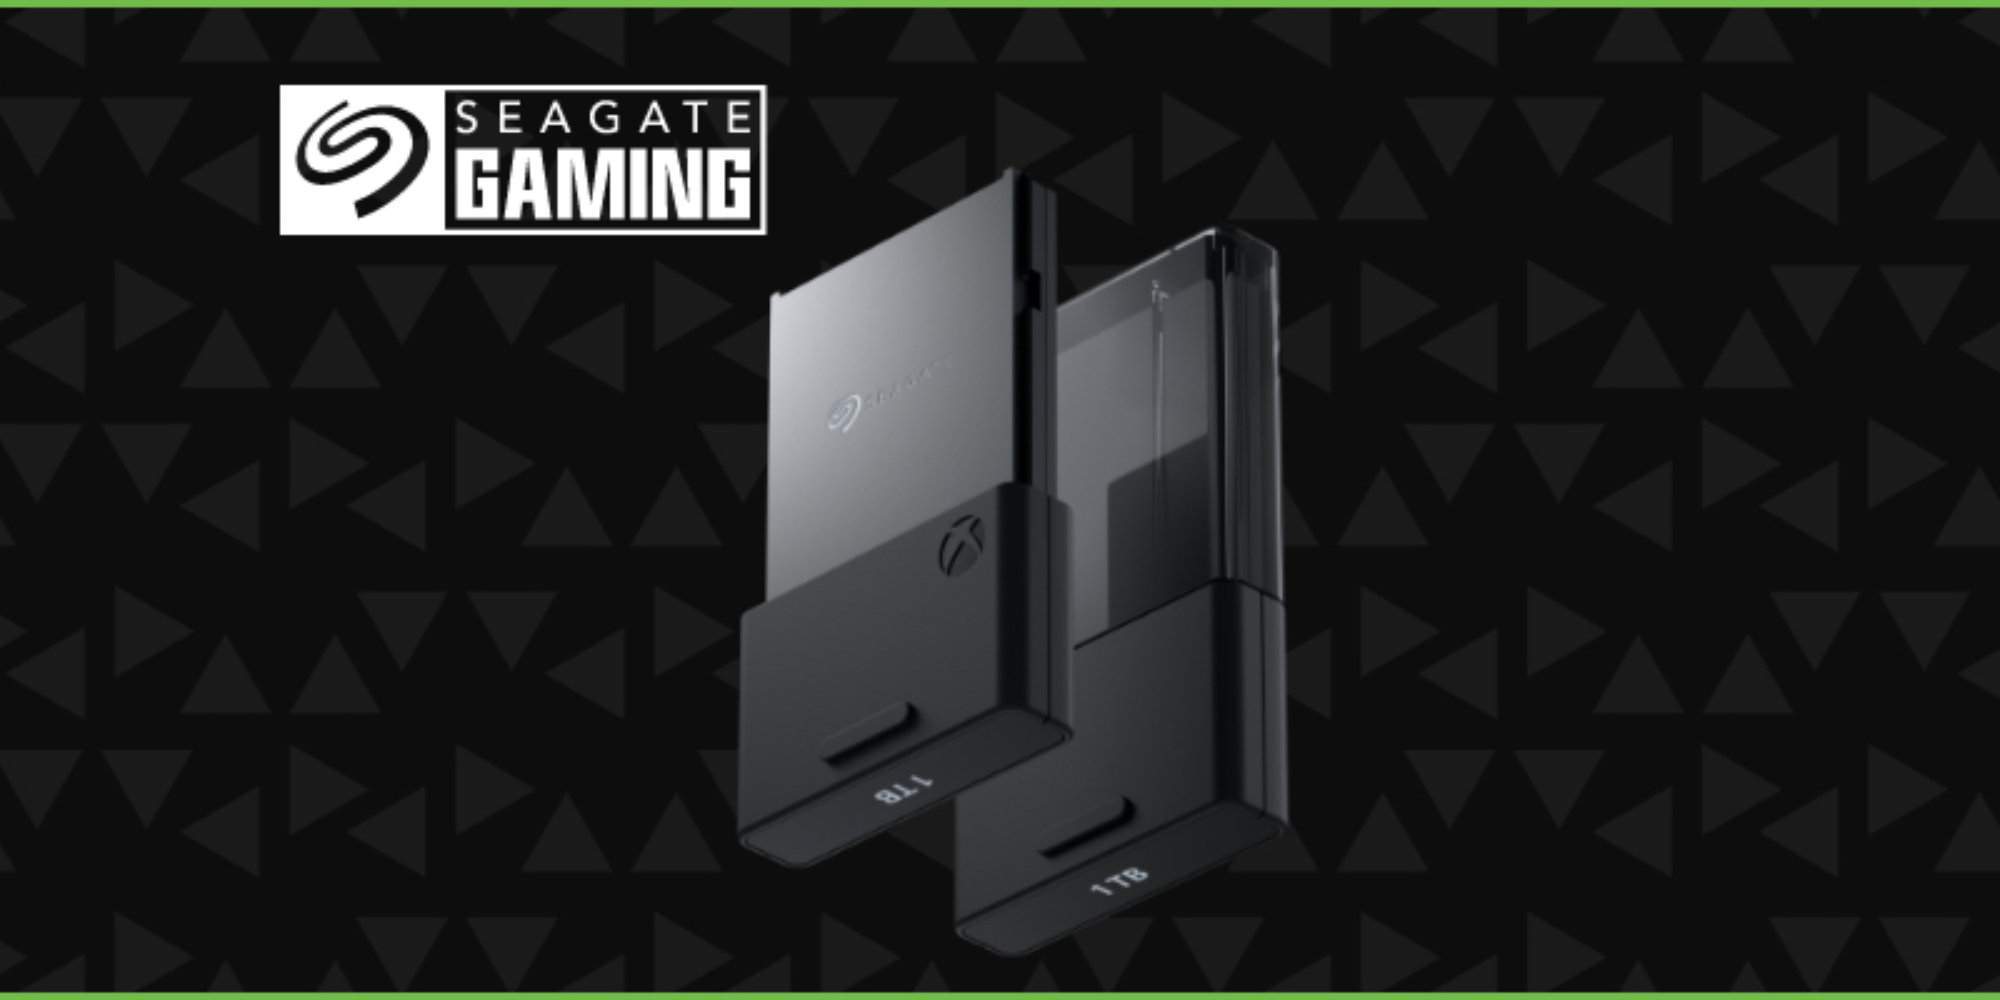 seagate xbox expansion card